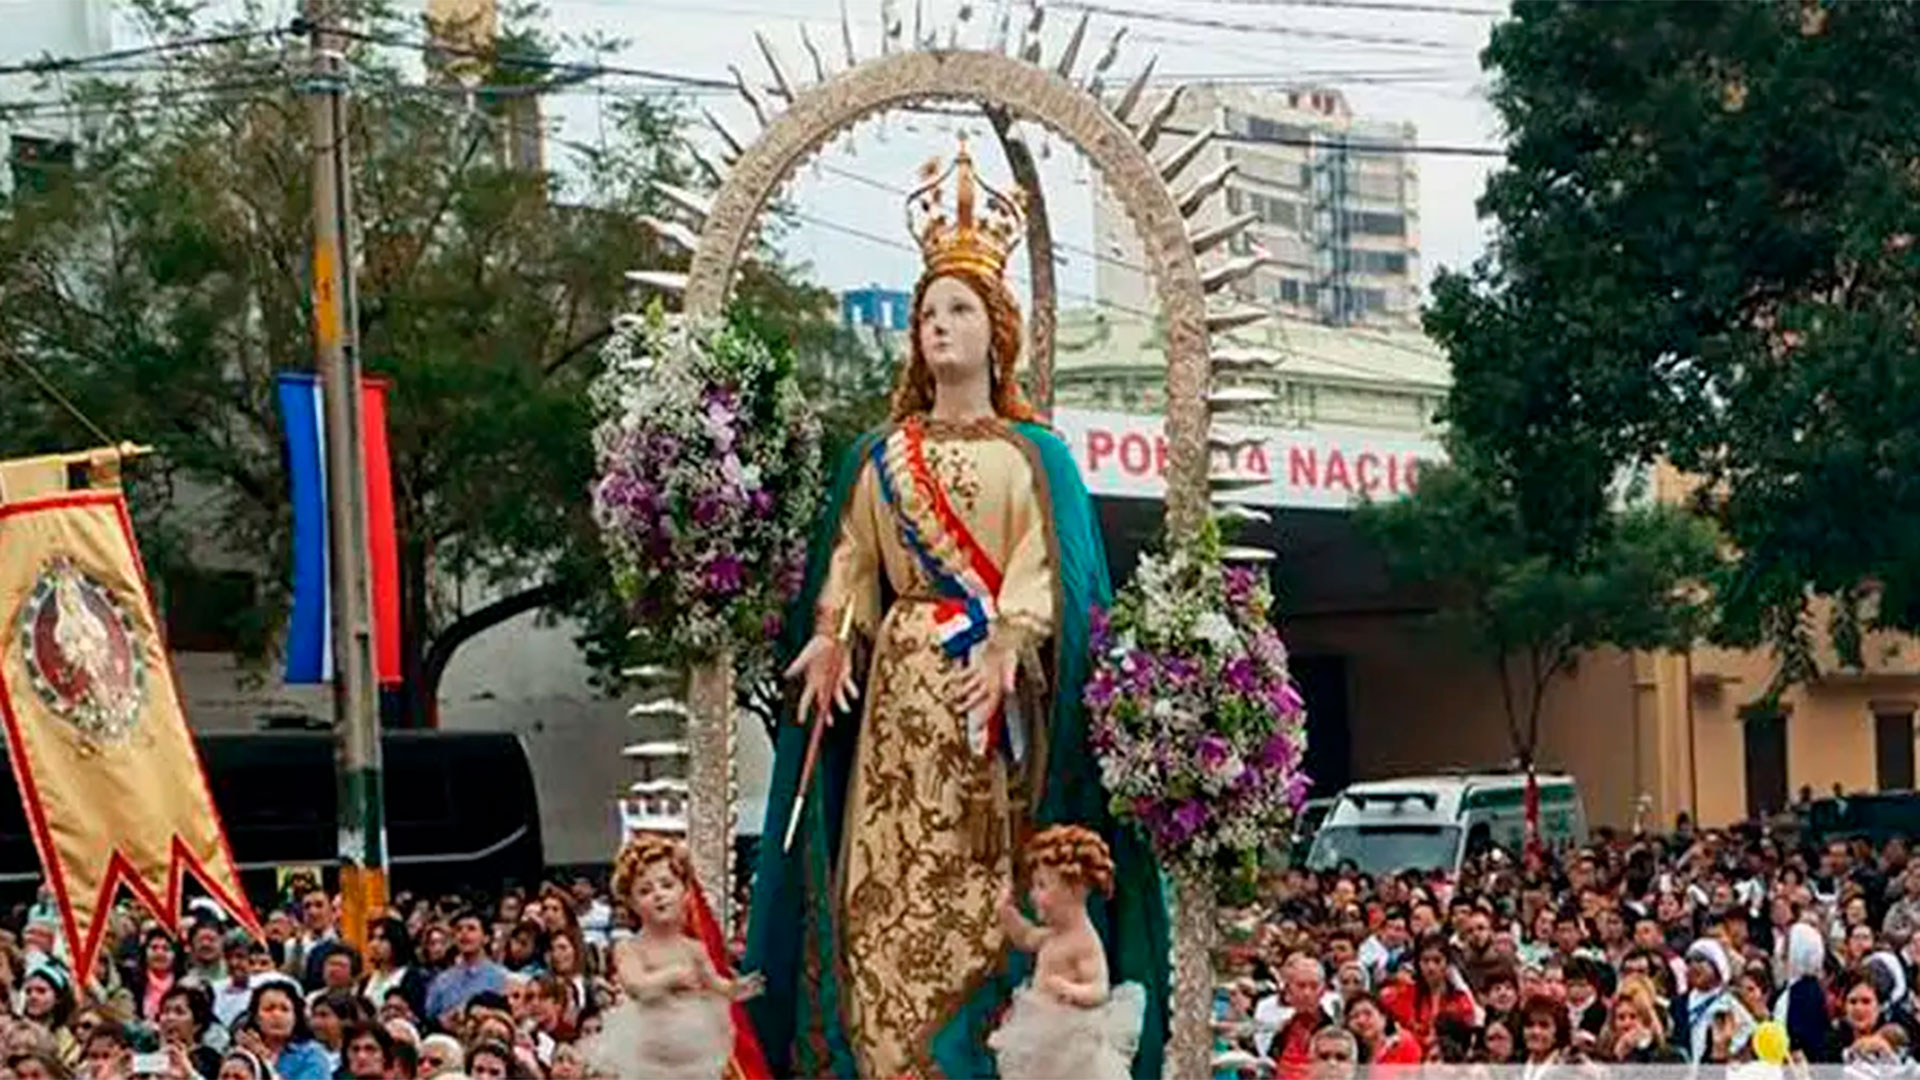 Celebration Of The Assumption Of The Virgin Mary In The City Of Asuncion, Paraguay, Founded On August 15, 1537, Which Bears That Name In Honor Of The Dogma